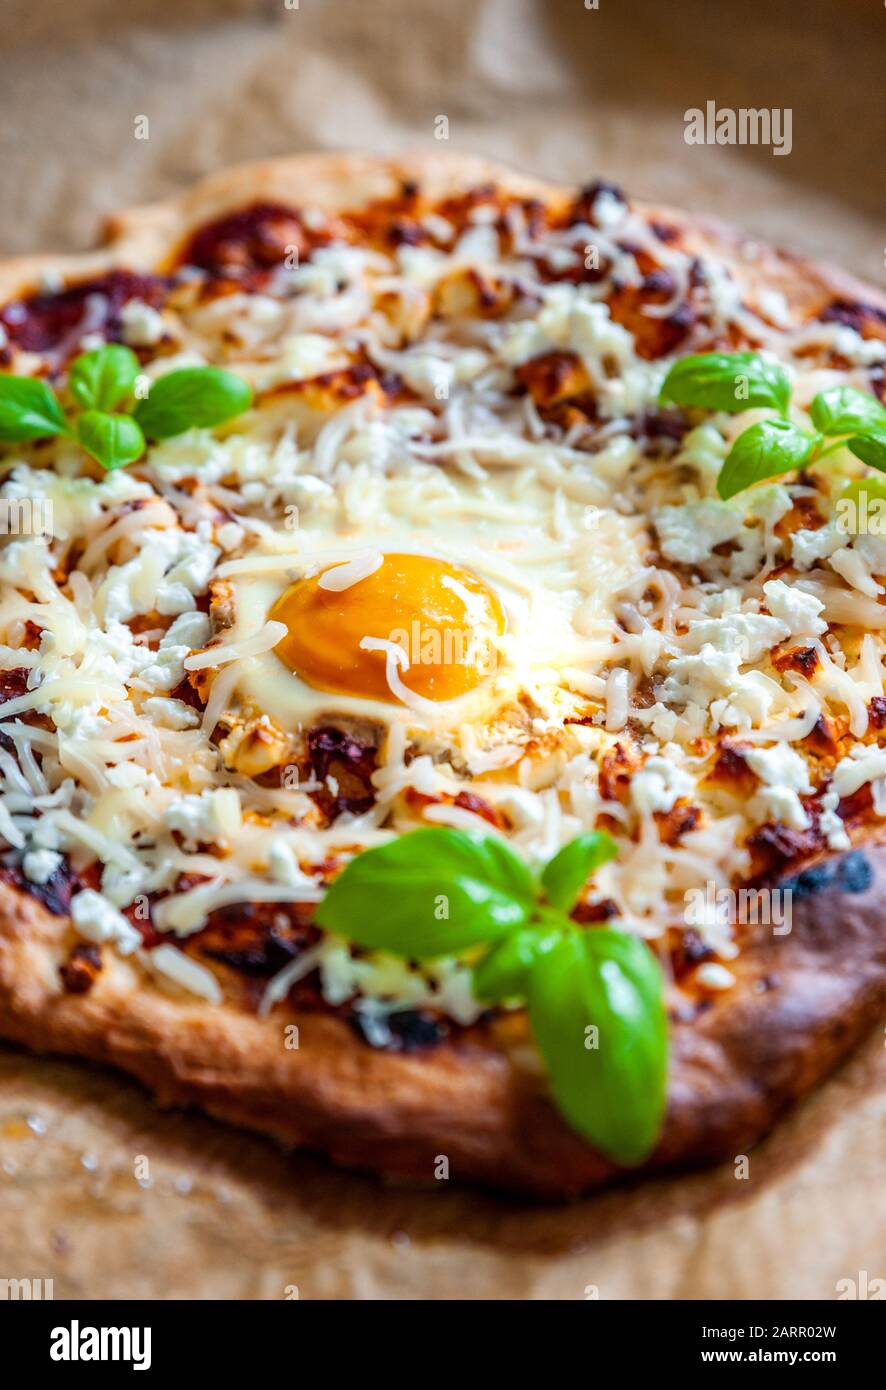 Pizza with egg, cheese and herbs. Rustic scene and dramatic light. Stock Photo